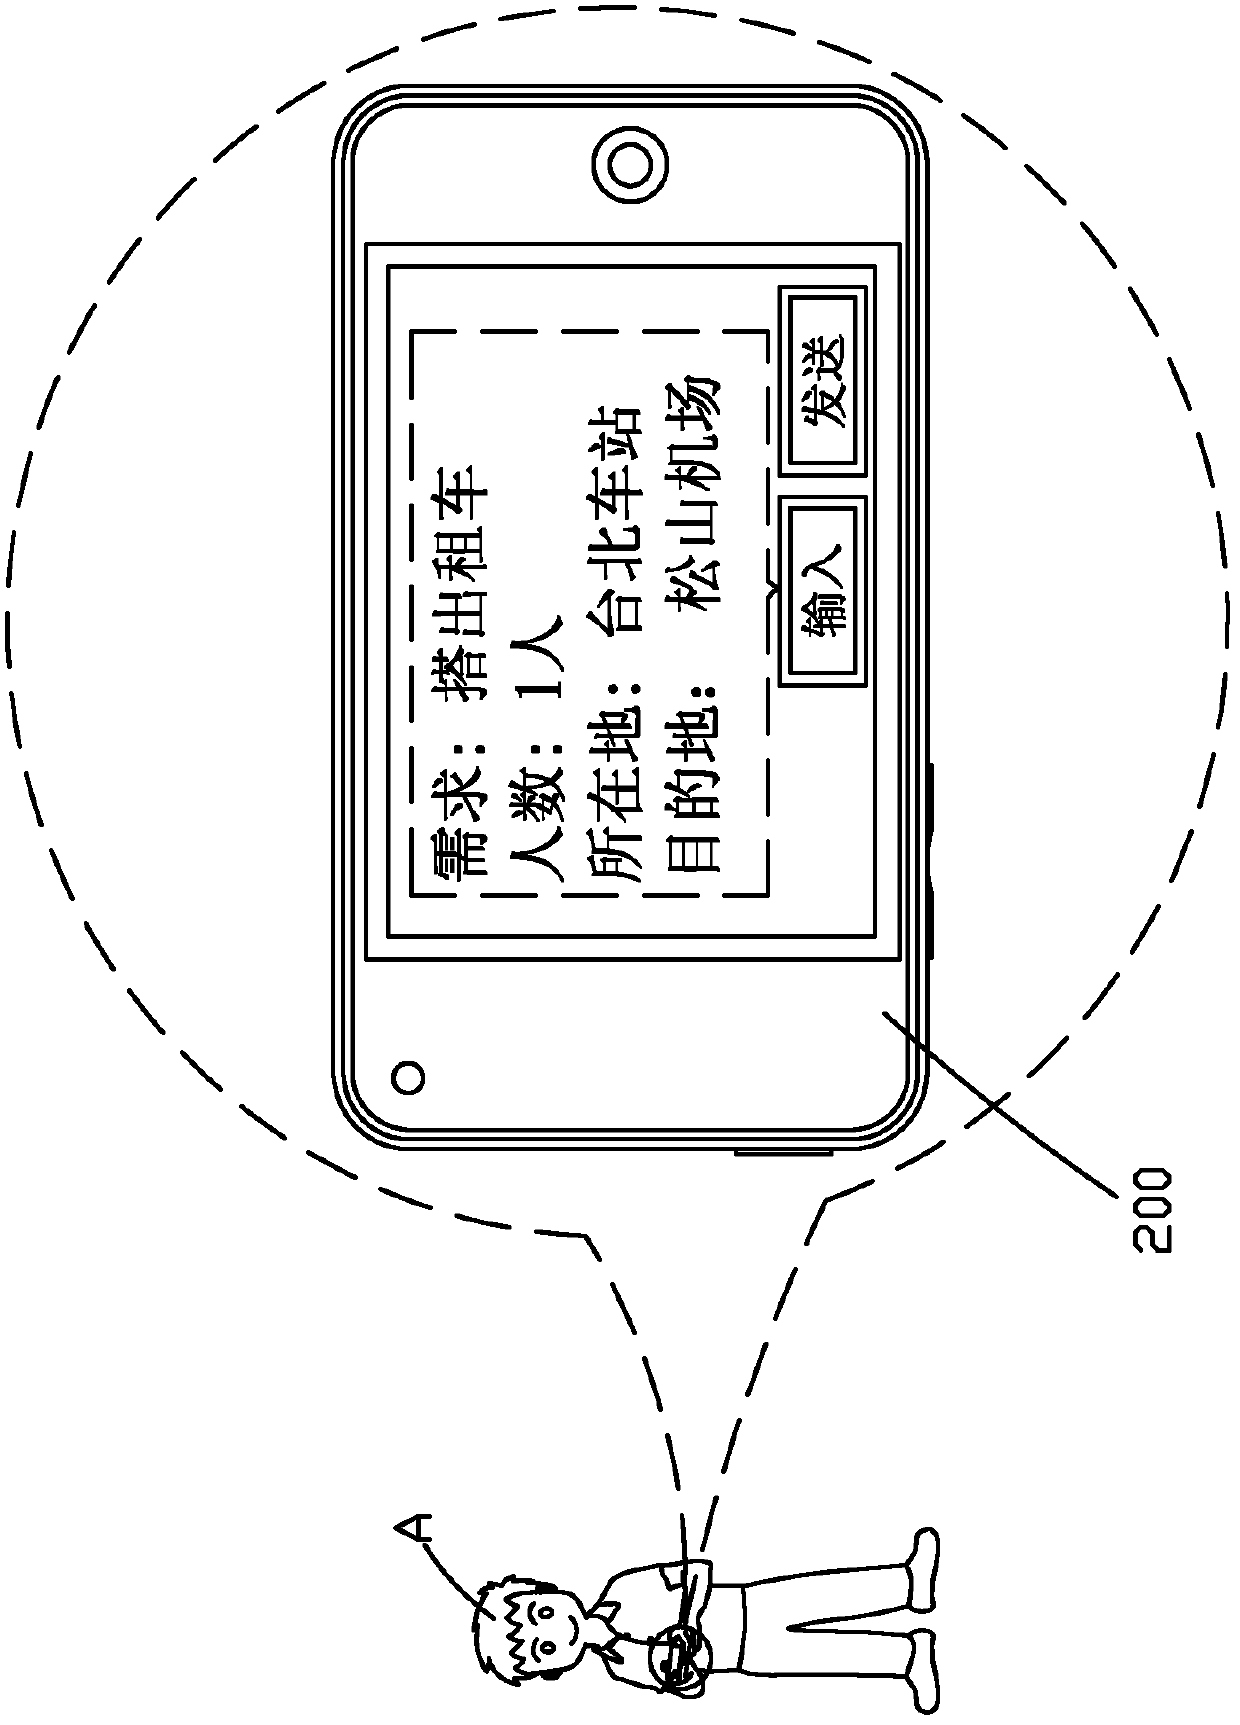 Supply-demand pairing system and method thereof